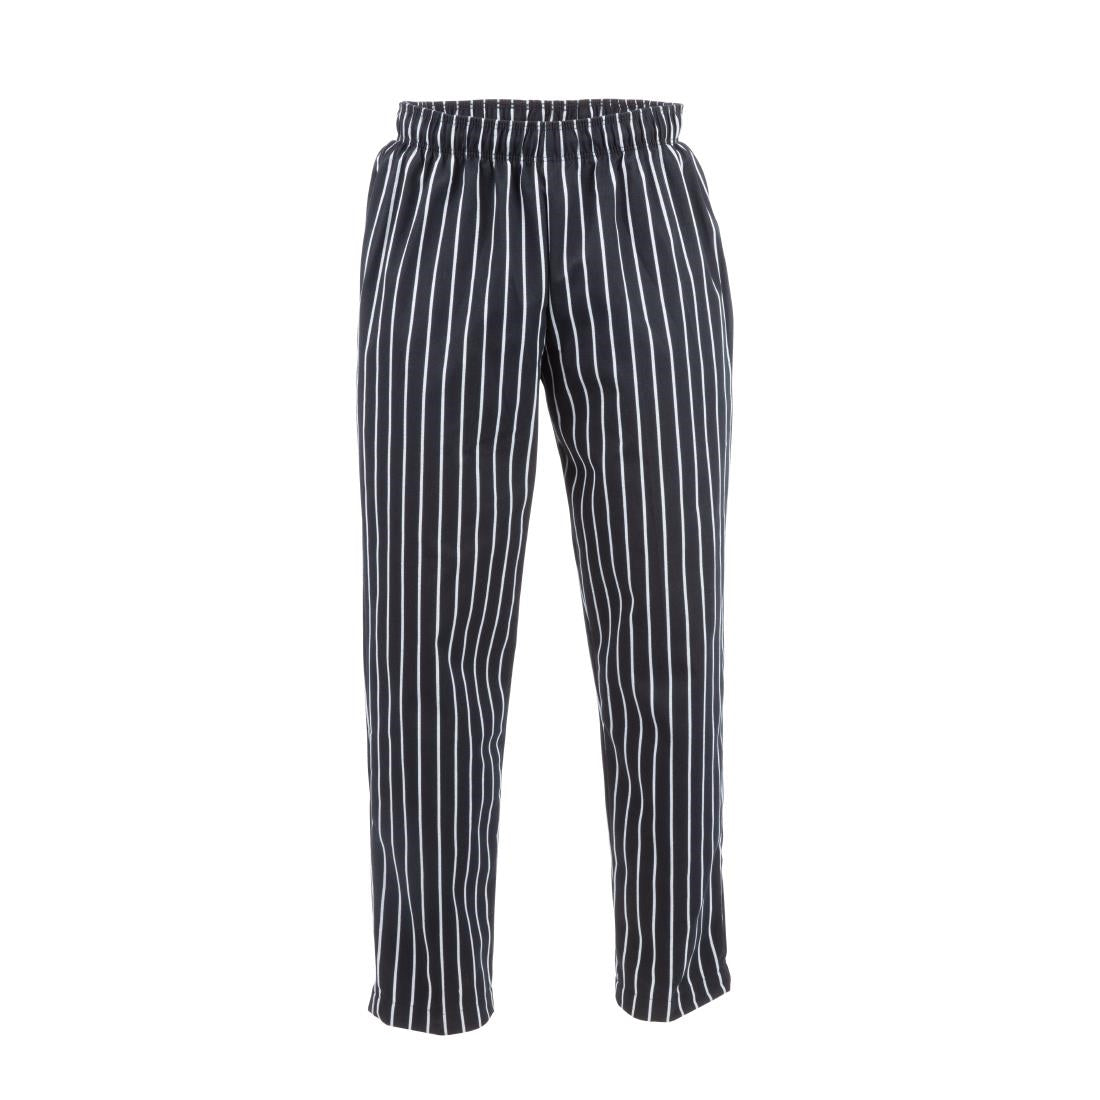 A940-XS Chef Works Designer Baggy Pant Black and White Striped XS JD Catering Equipment Solutions Ltd